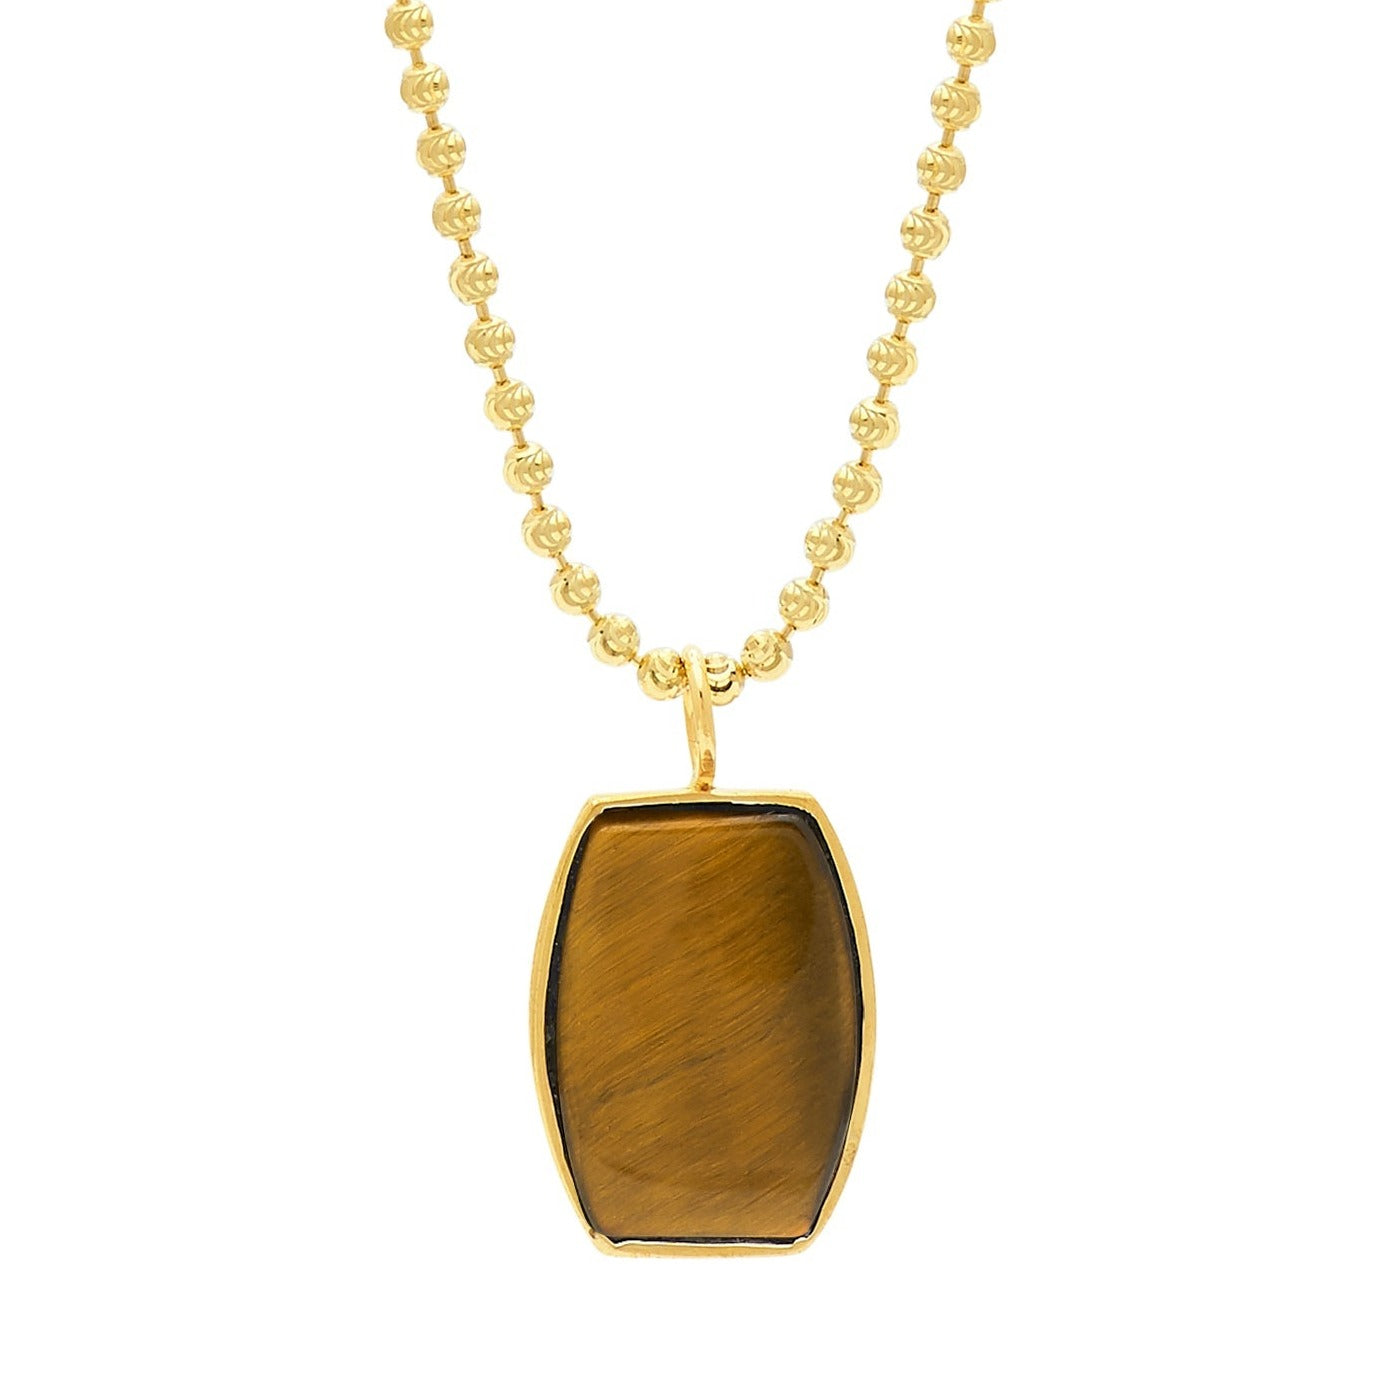 Archie Necklace - Tiger's Eye